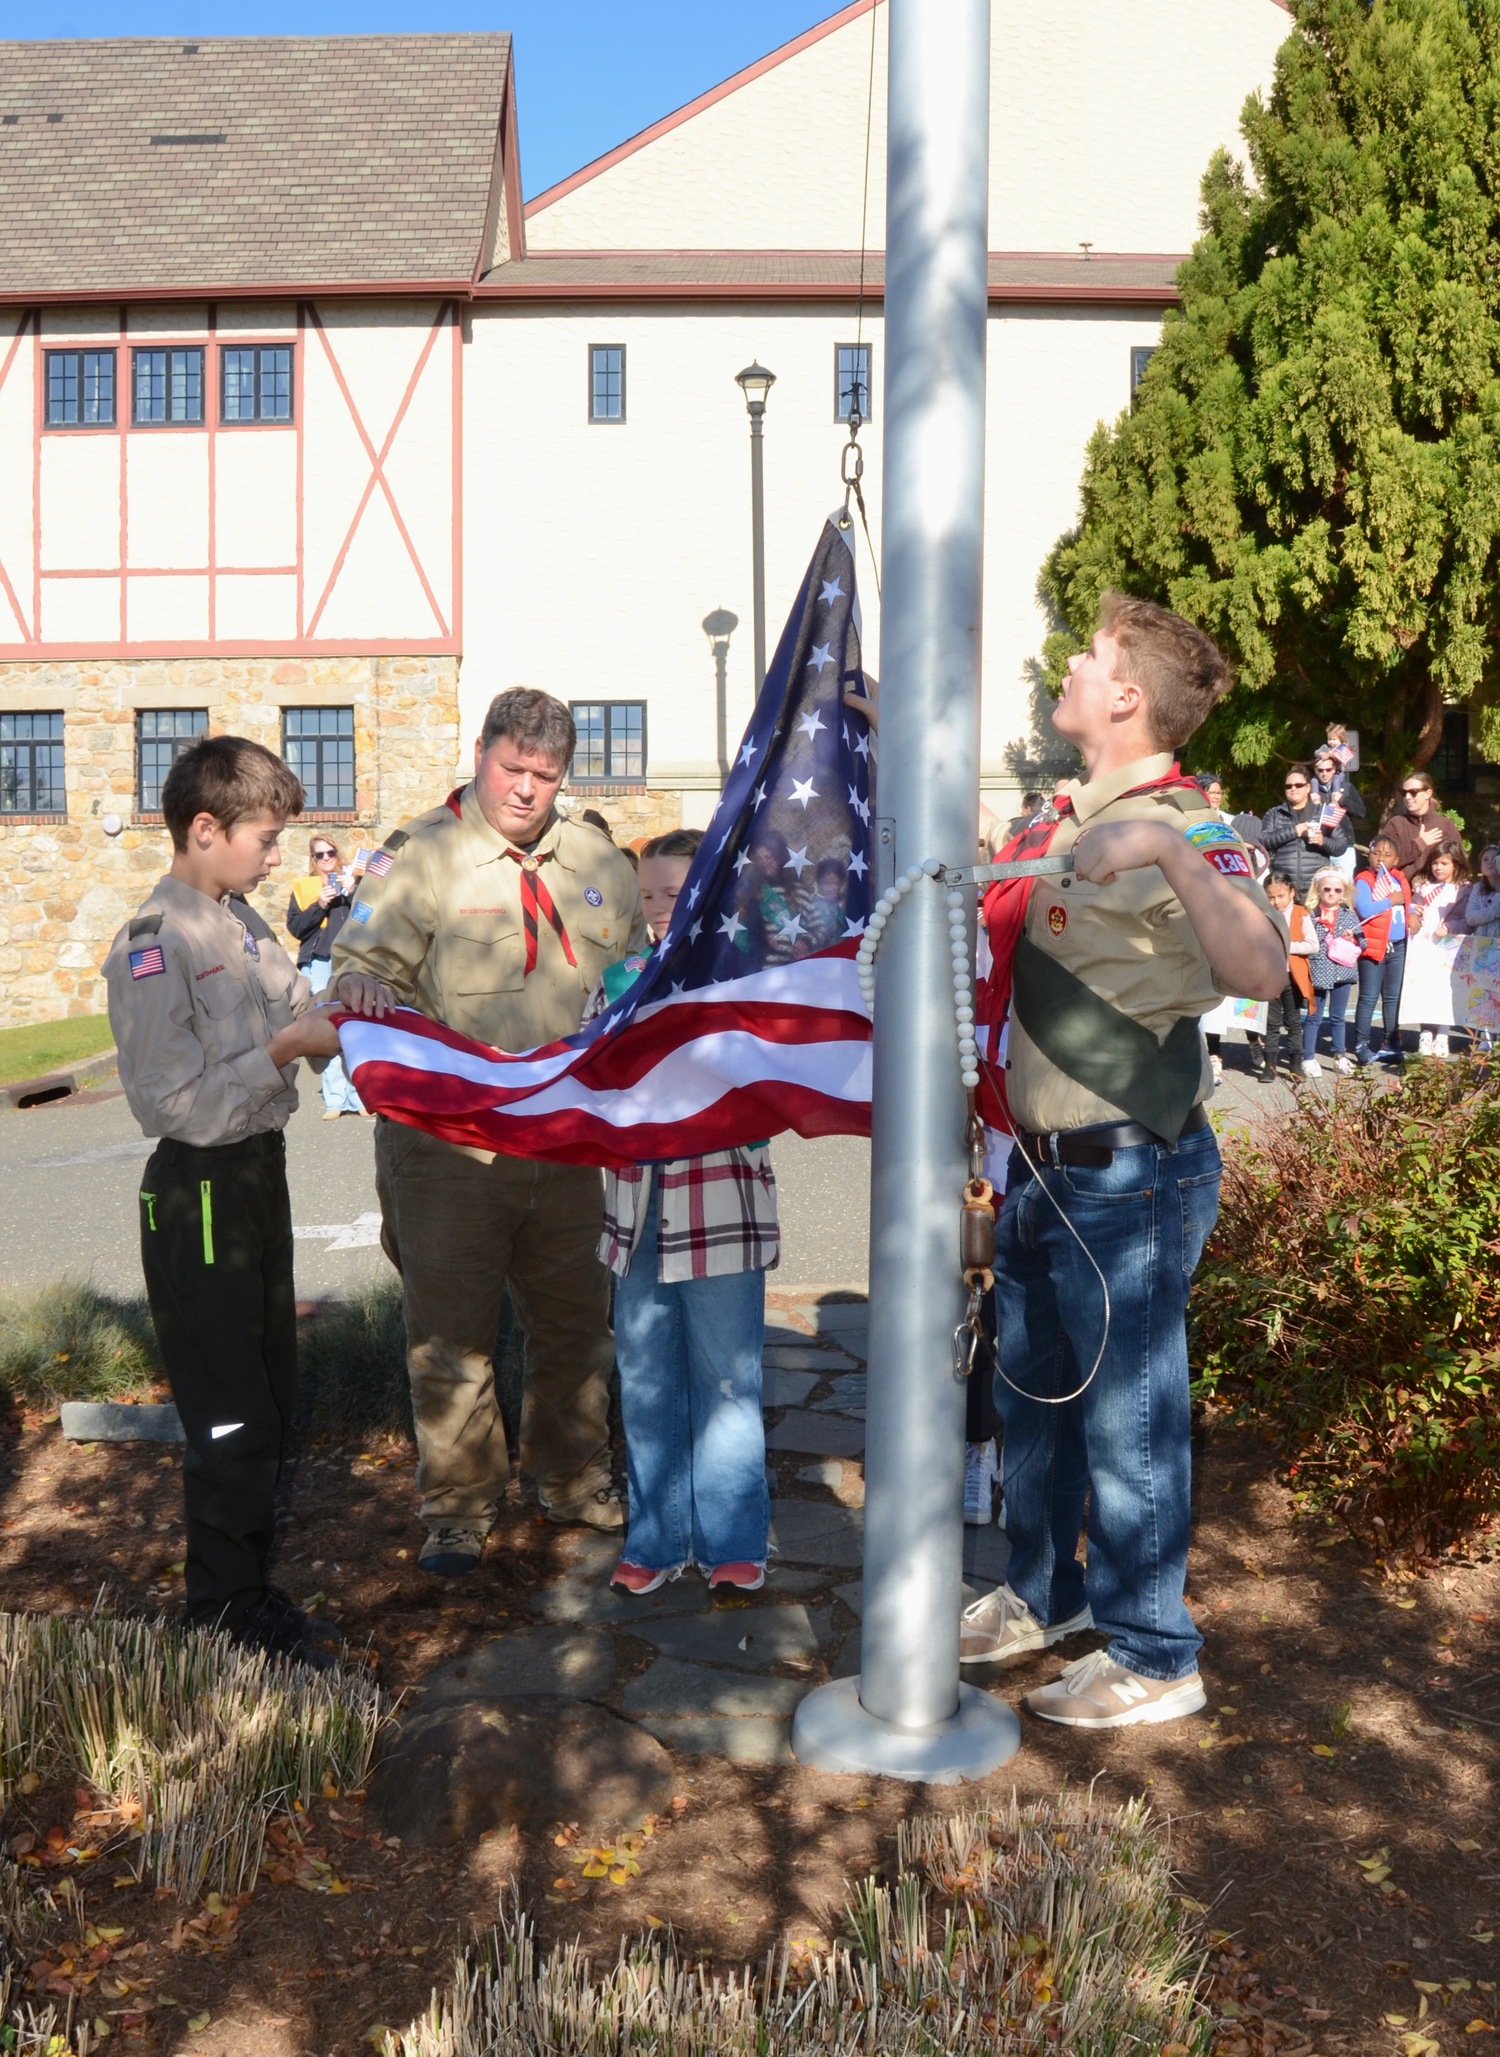 Scouts raise the flag at the The Montauk Playhouse Community Center Foundation's annual Veterans Day Flag Raising Ceremony on Saturday.  KYRIL BROMLEY